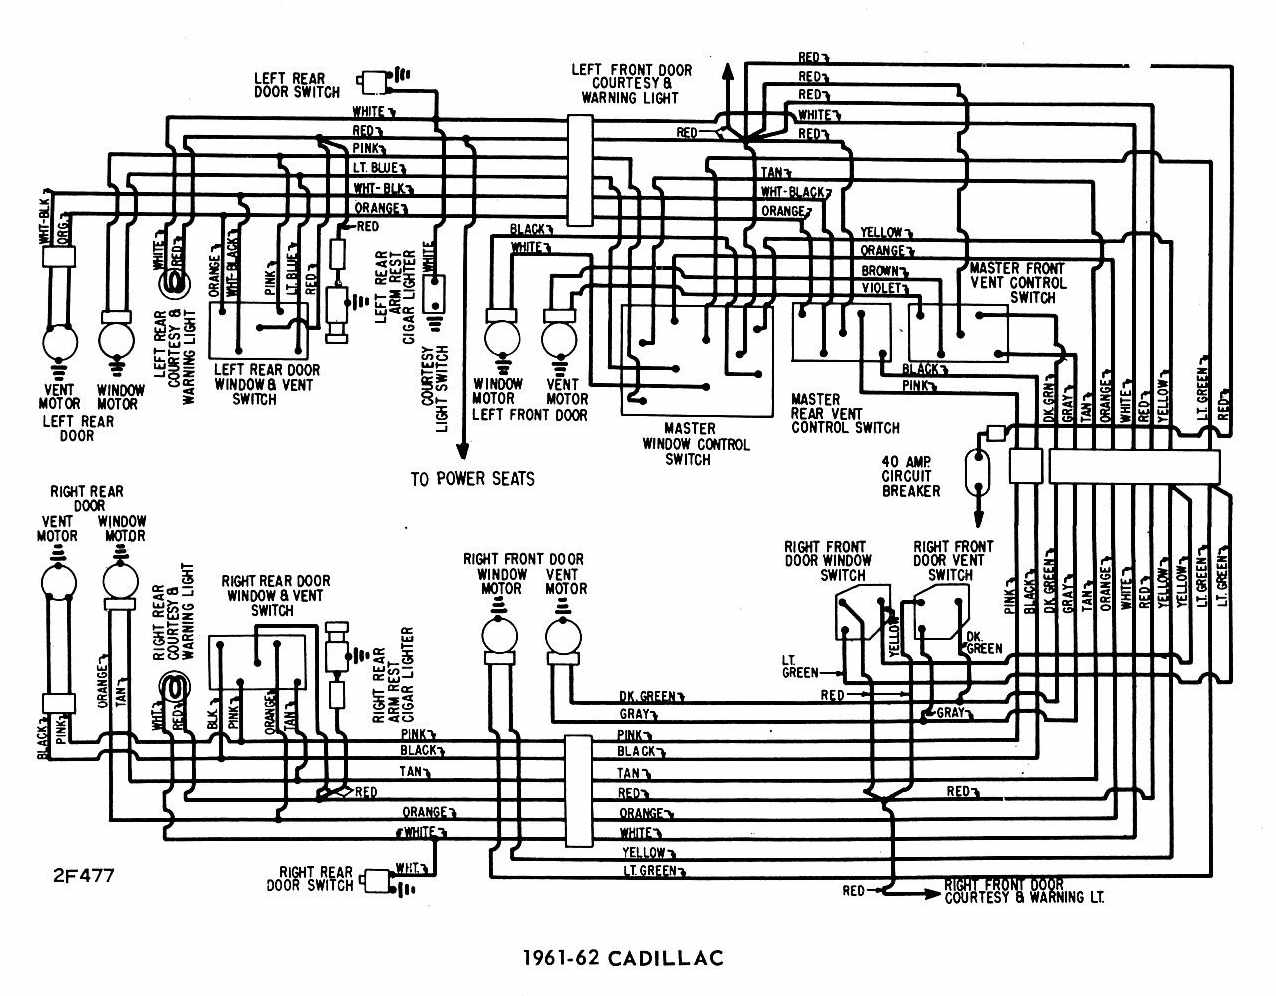 1994 Cadillac Seville Starter Wiring Diagram from www.automotive-manuals.net